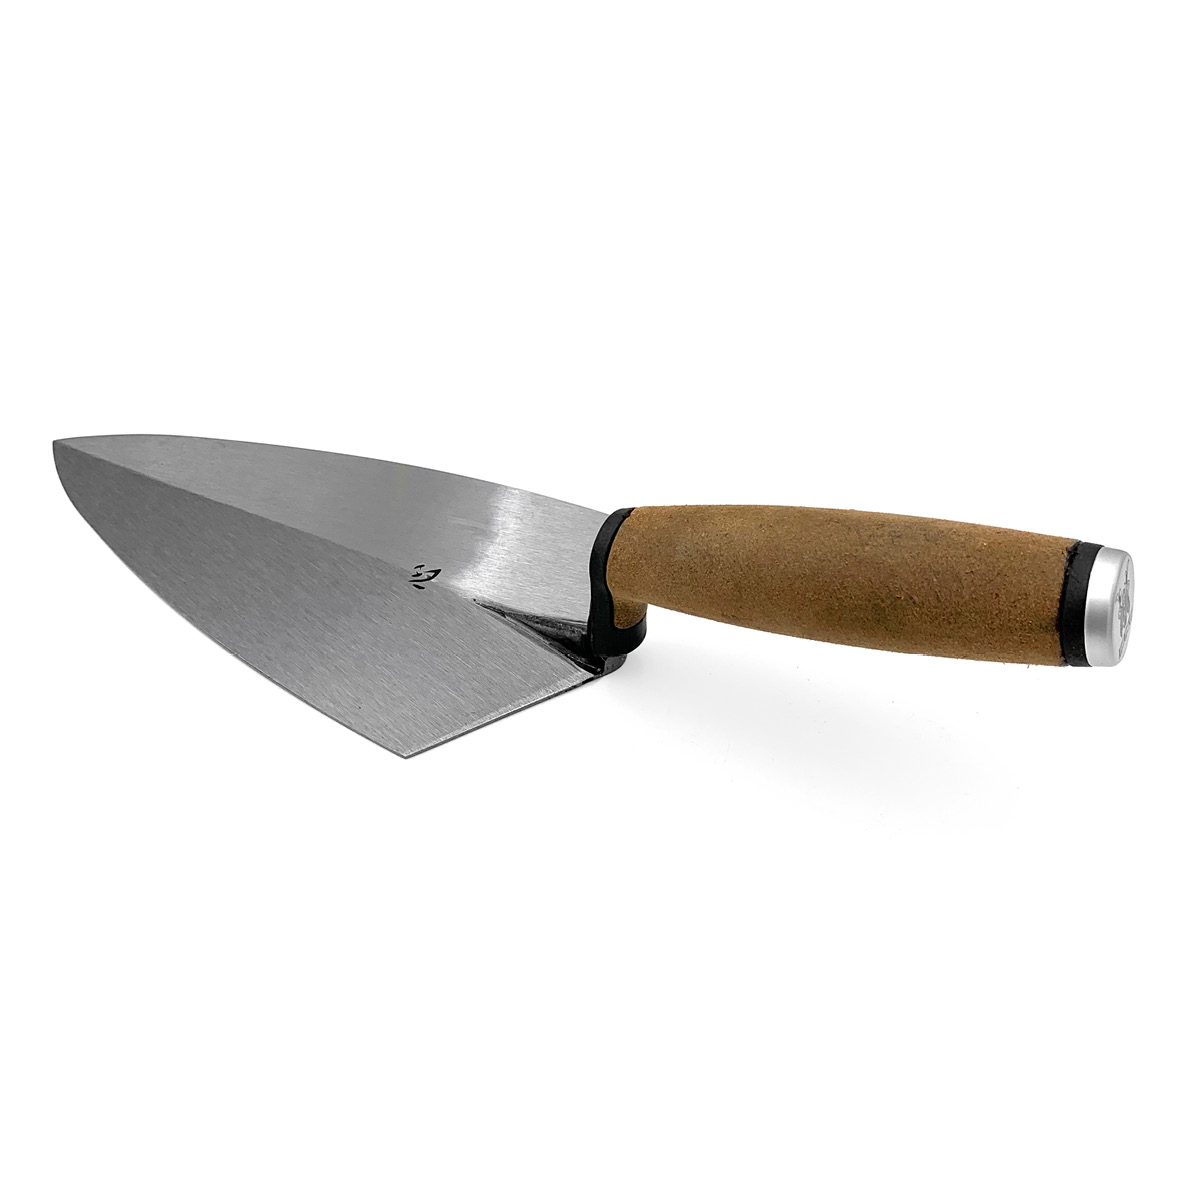 Philadelphia Pattern Kokoro Brick Trowel with a leather handle. These professional masonry tools are made from a single piece of forged steel for extra strength. Available from Speedcrete, United Kingdom.